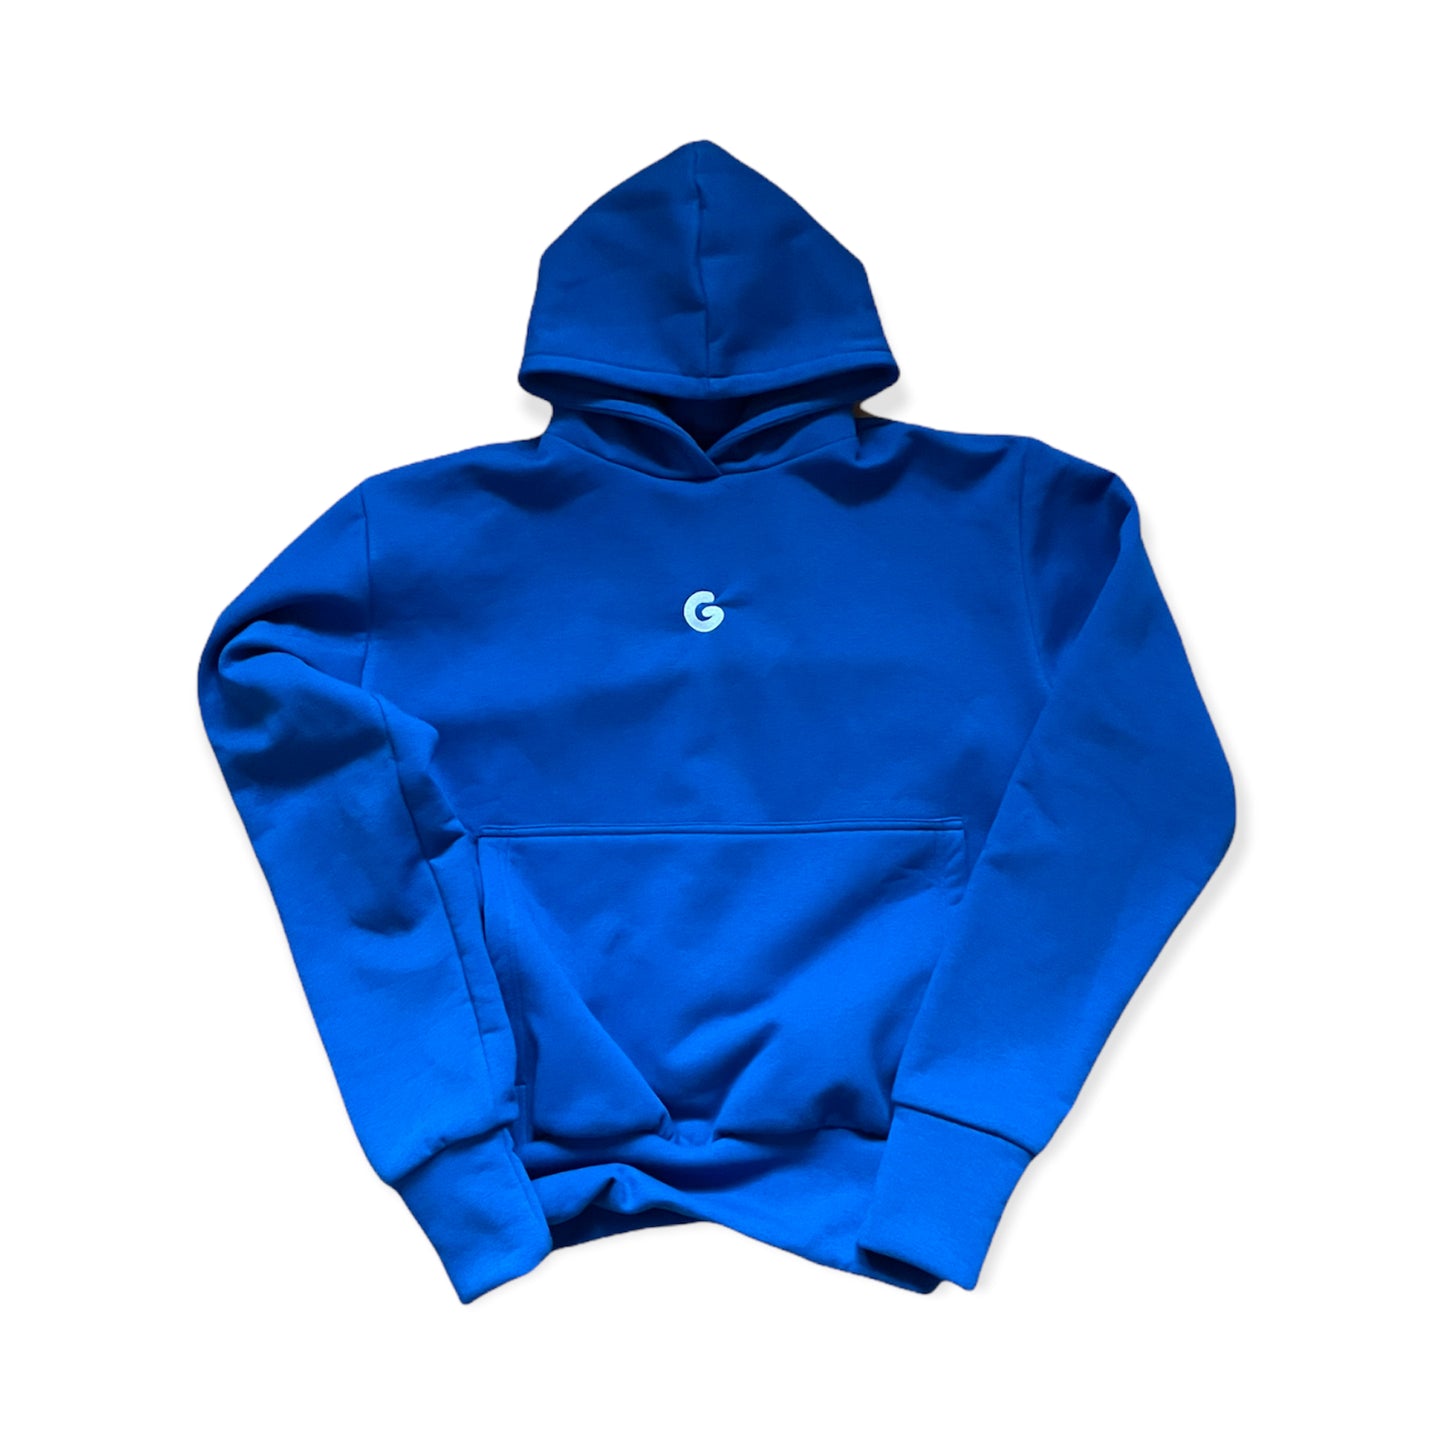 TheG Tracksuit // blue